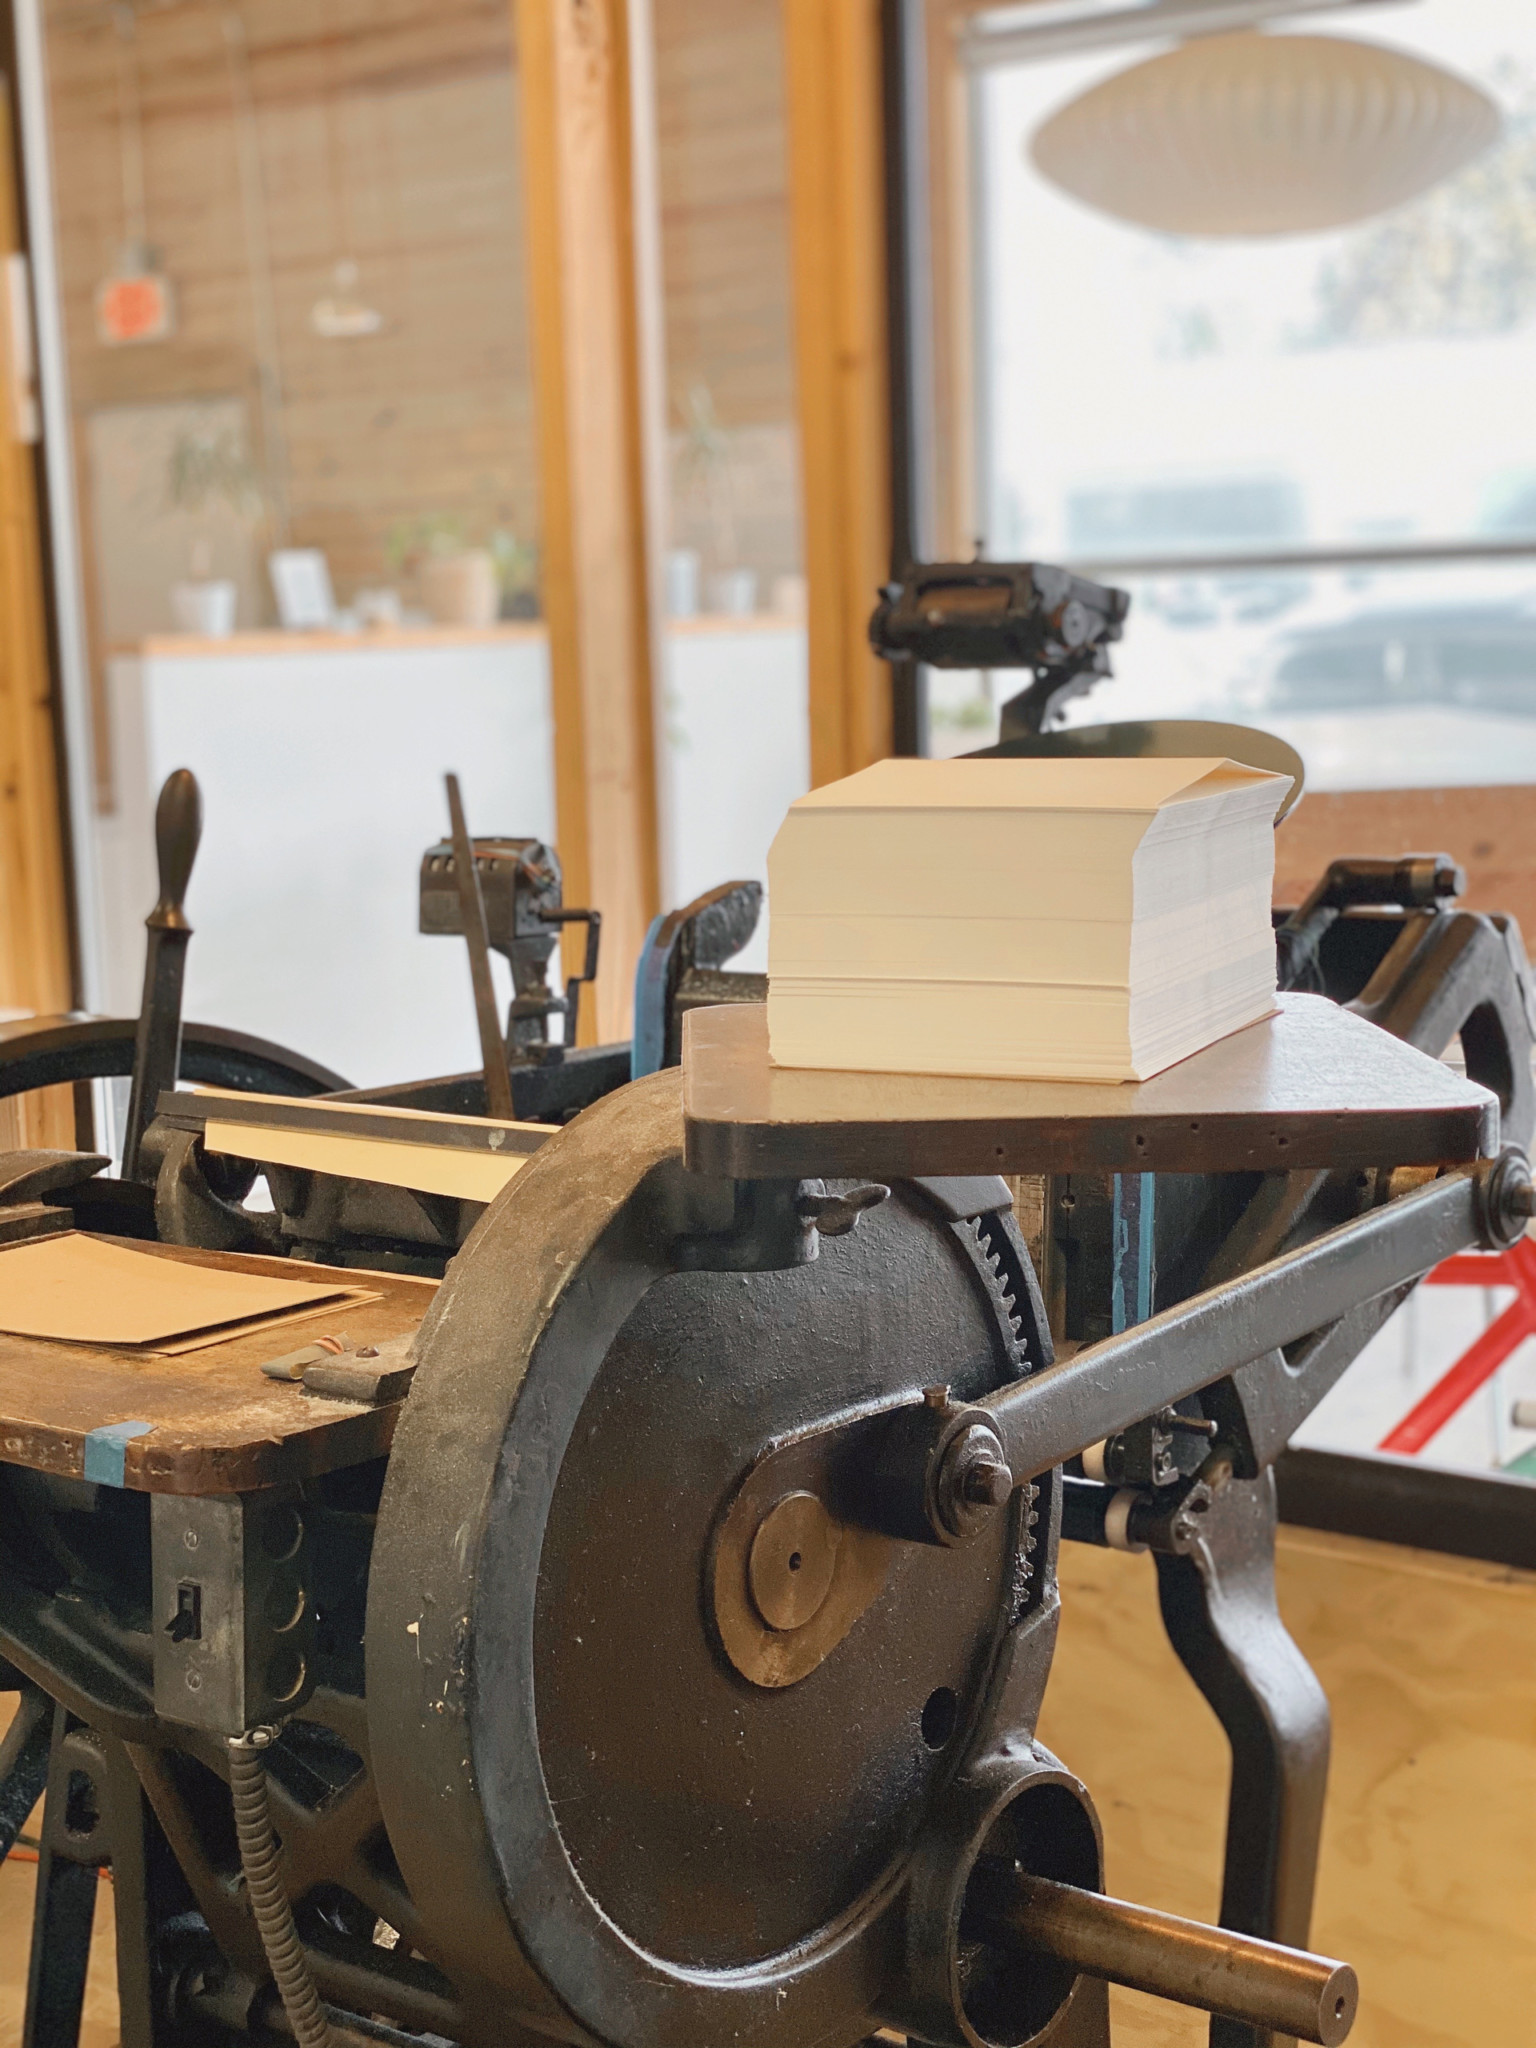 A stack of paper rests on the feed board of the antique printing press.